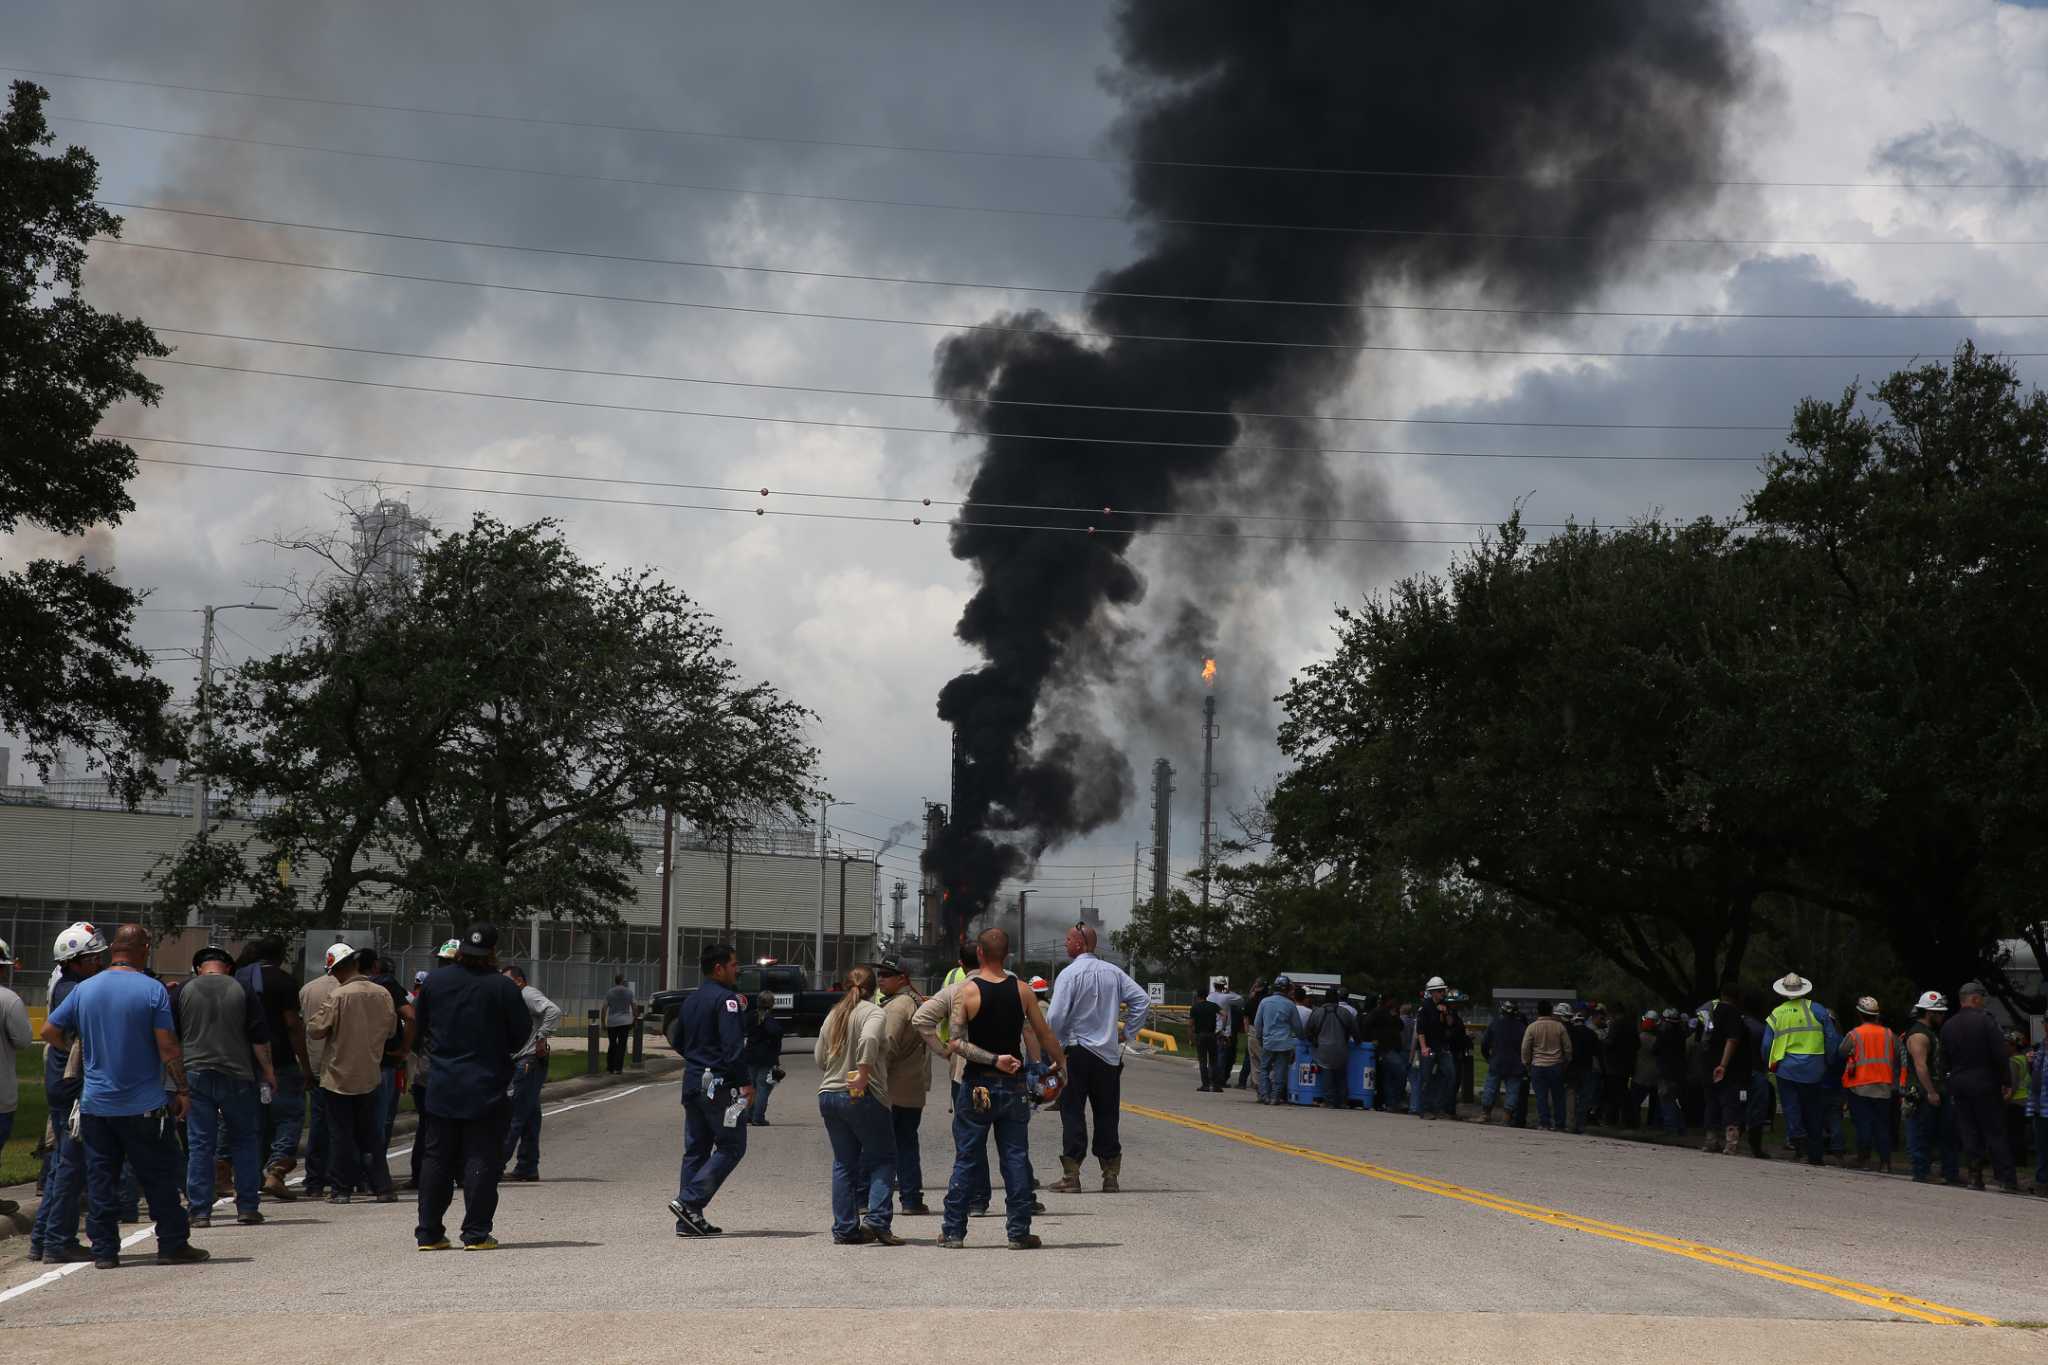 Fire at Exxon plant in Baytown, shelter in place issued - Houston Chronicle